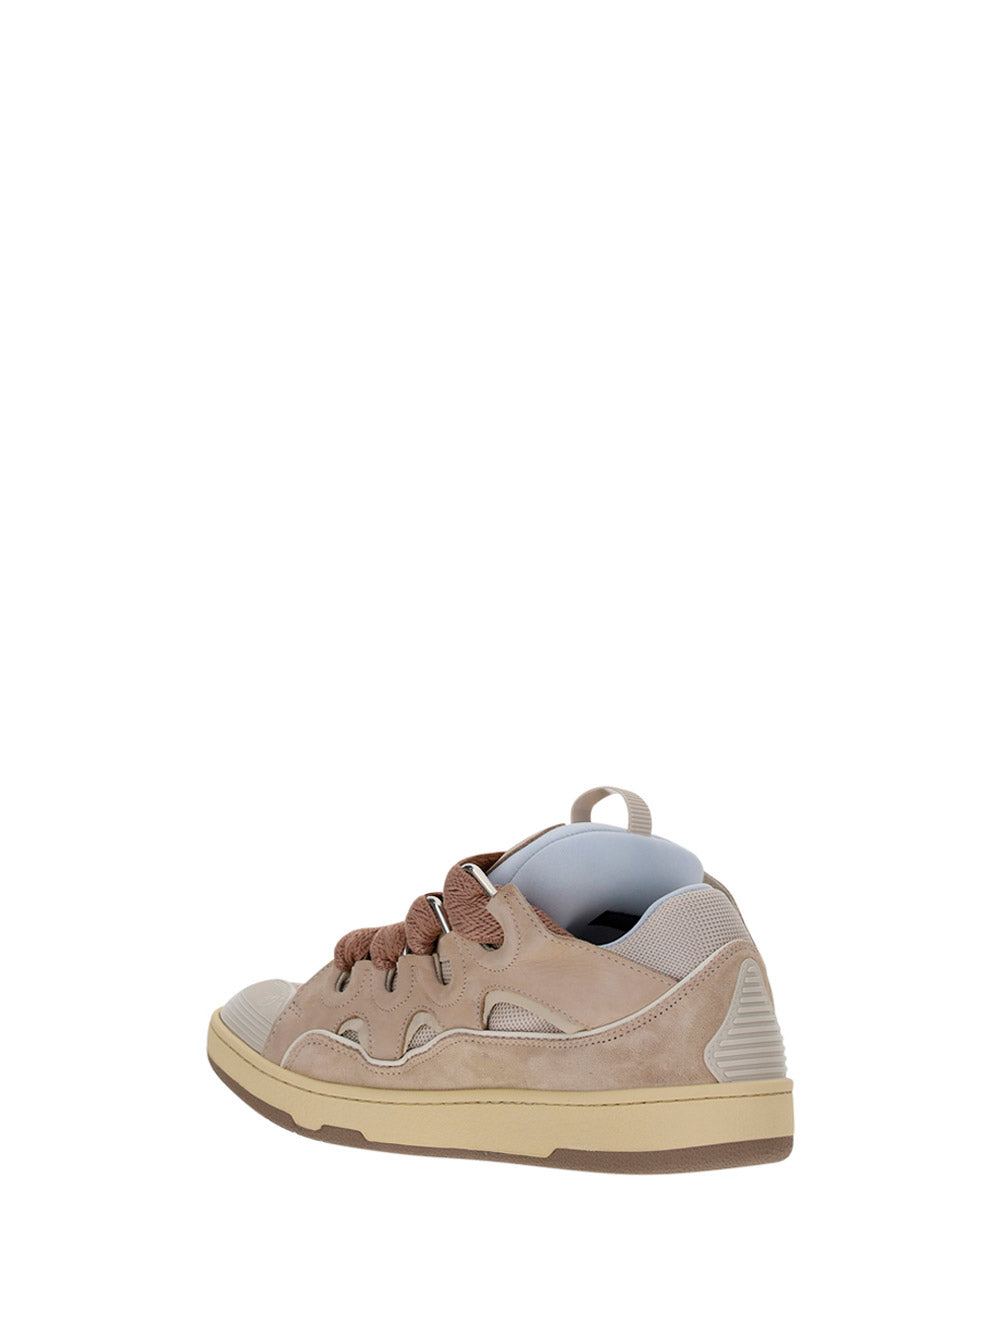 Leather Curb Sneakers - Dusty Pink/Brown